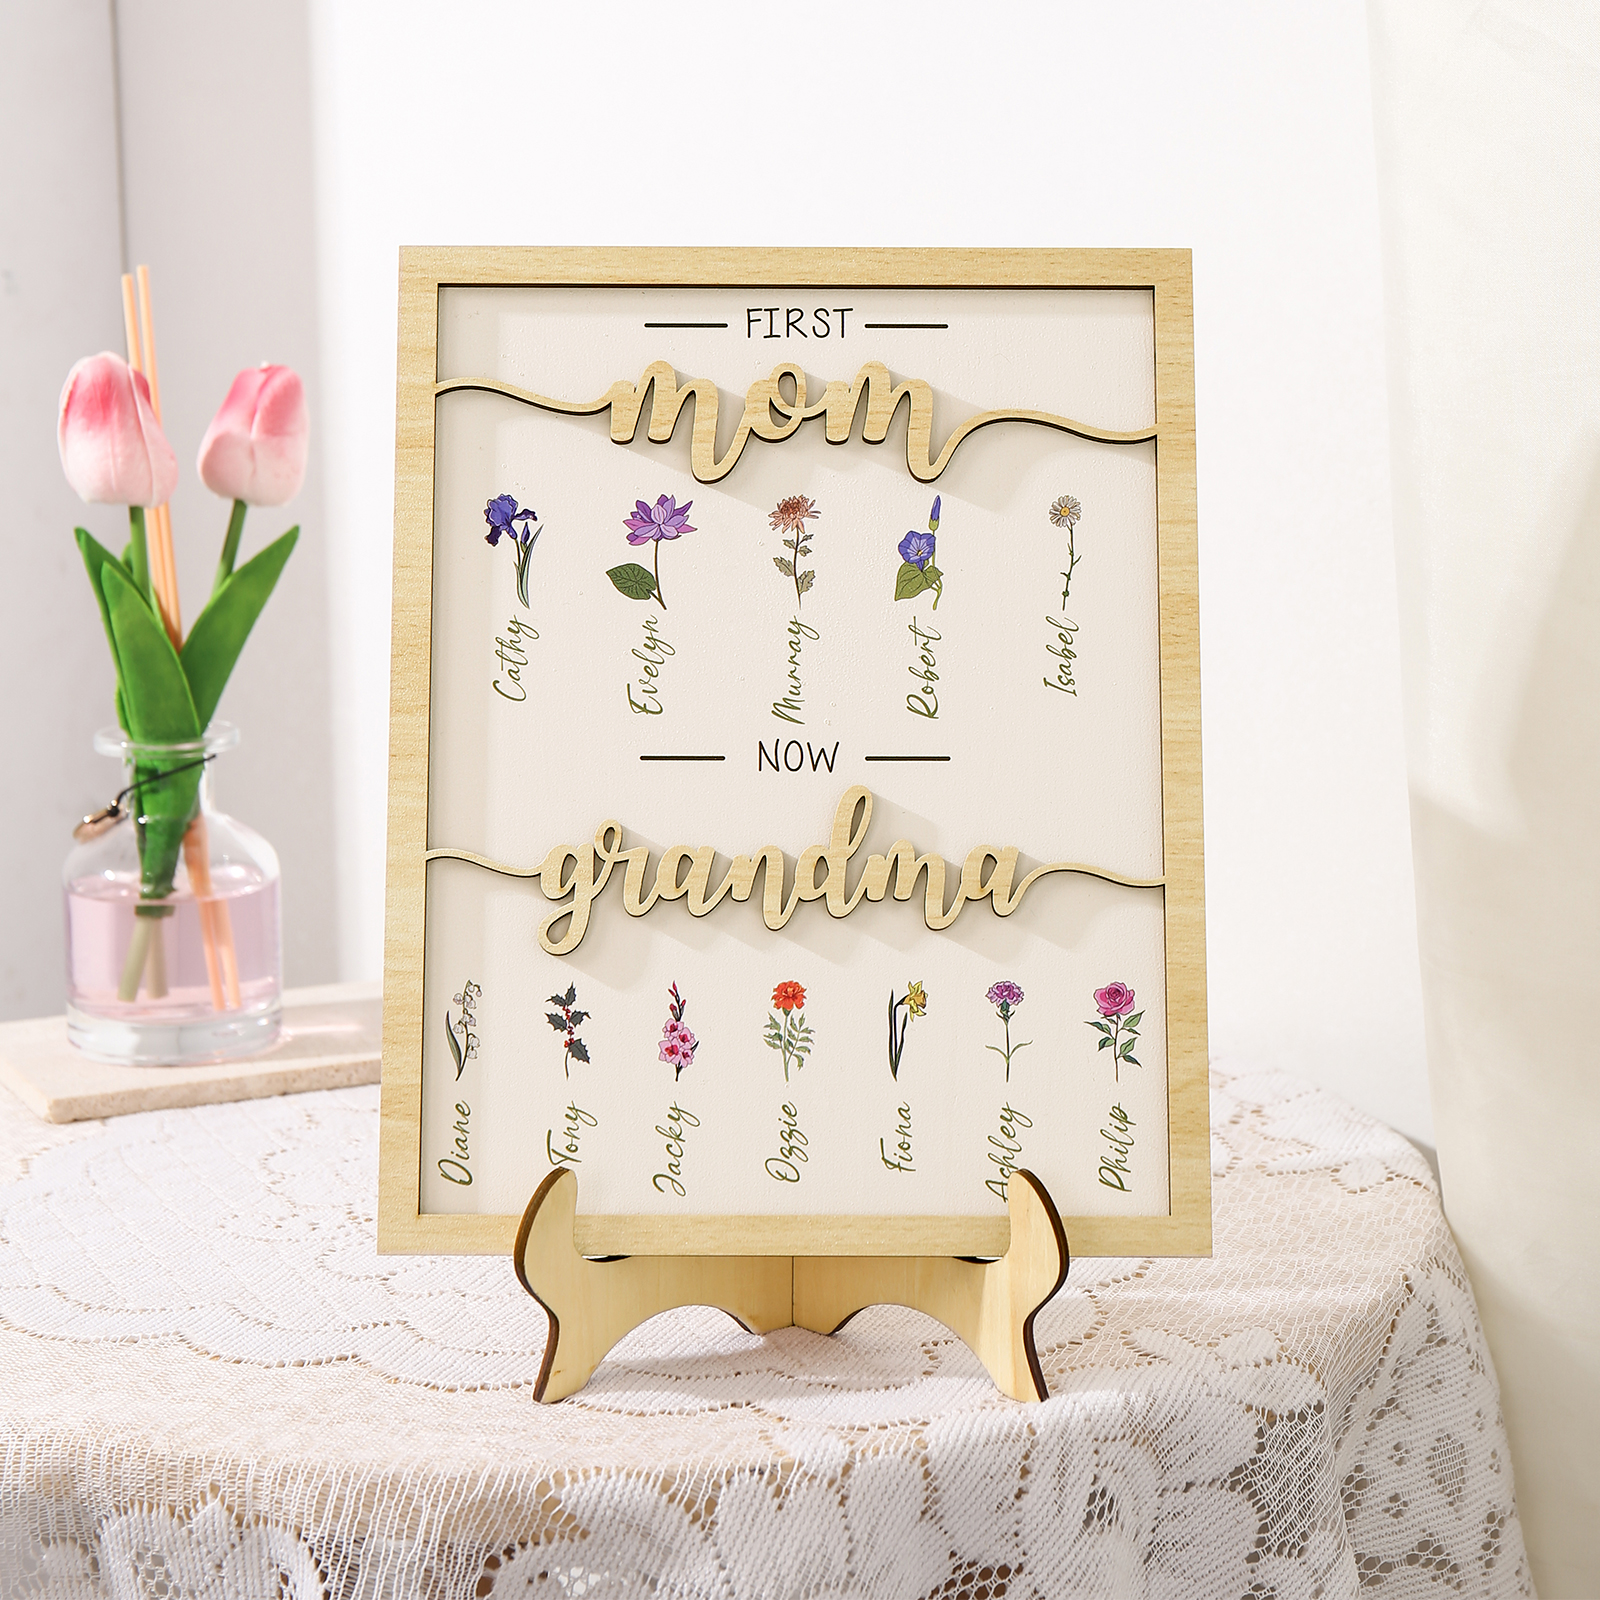 12 Names - Personalized Customized Birth Flower Home Frame Wooden Decoration for Mom/Grandma